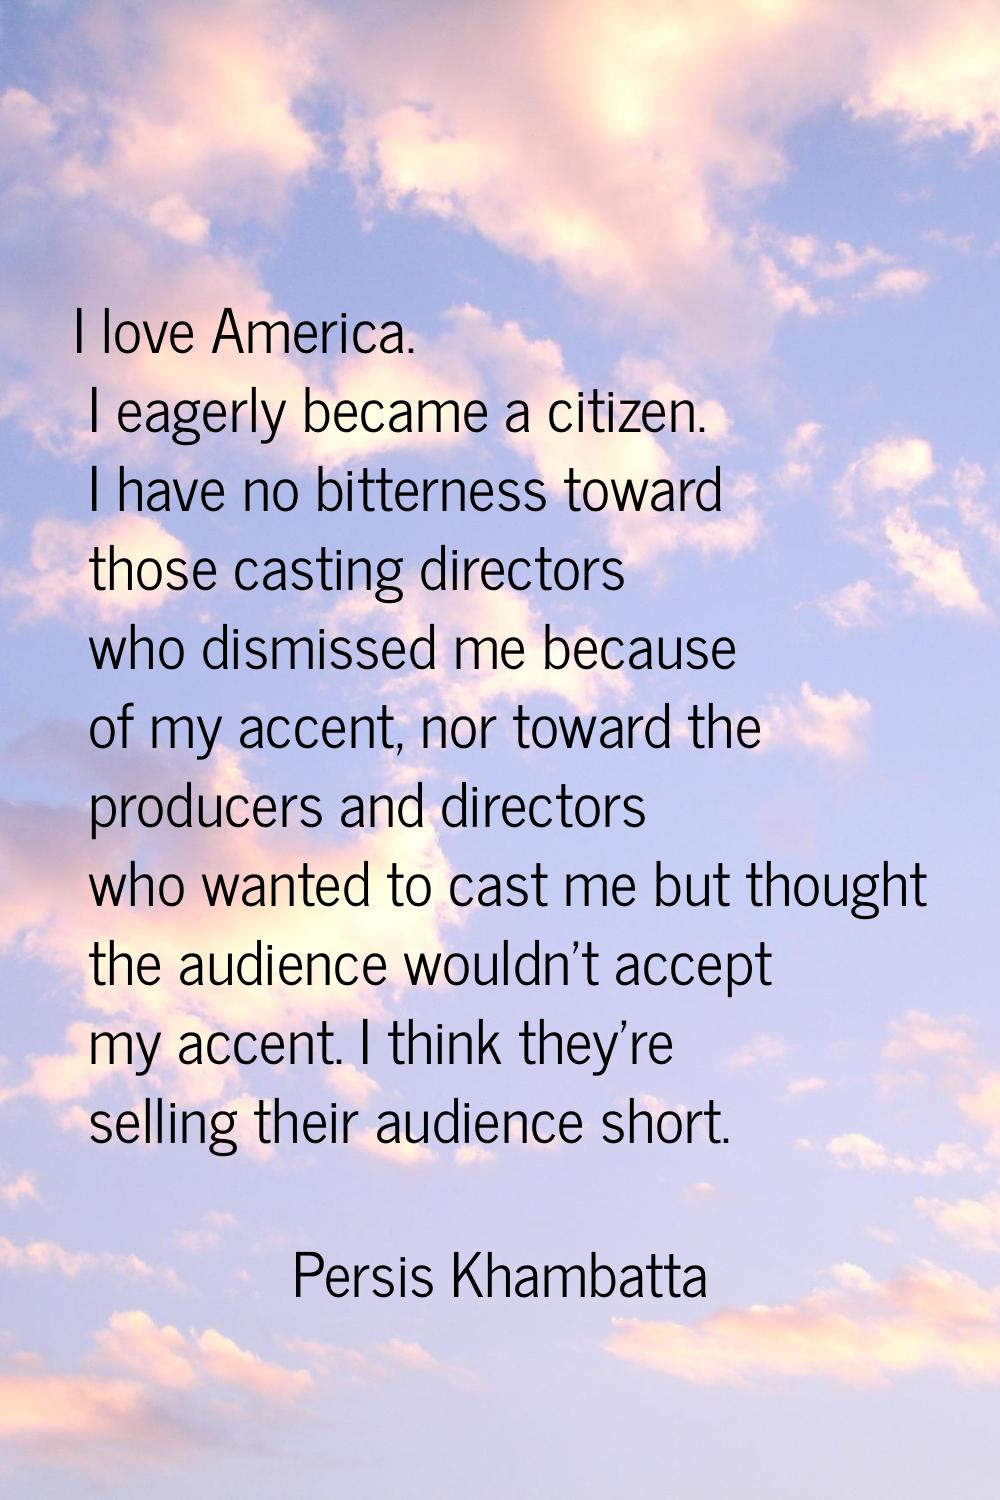 I love America. I eagerly became a citizen. I have no bitterness toward those casting directors who